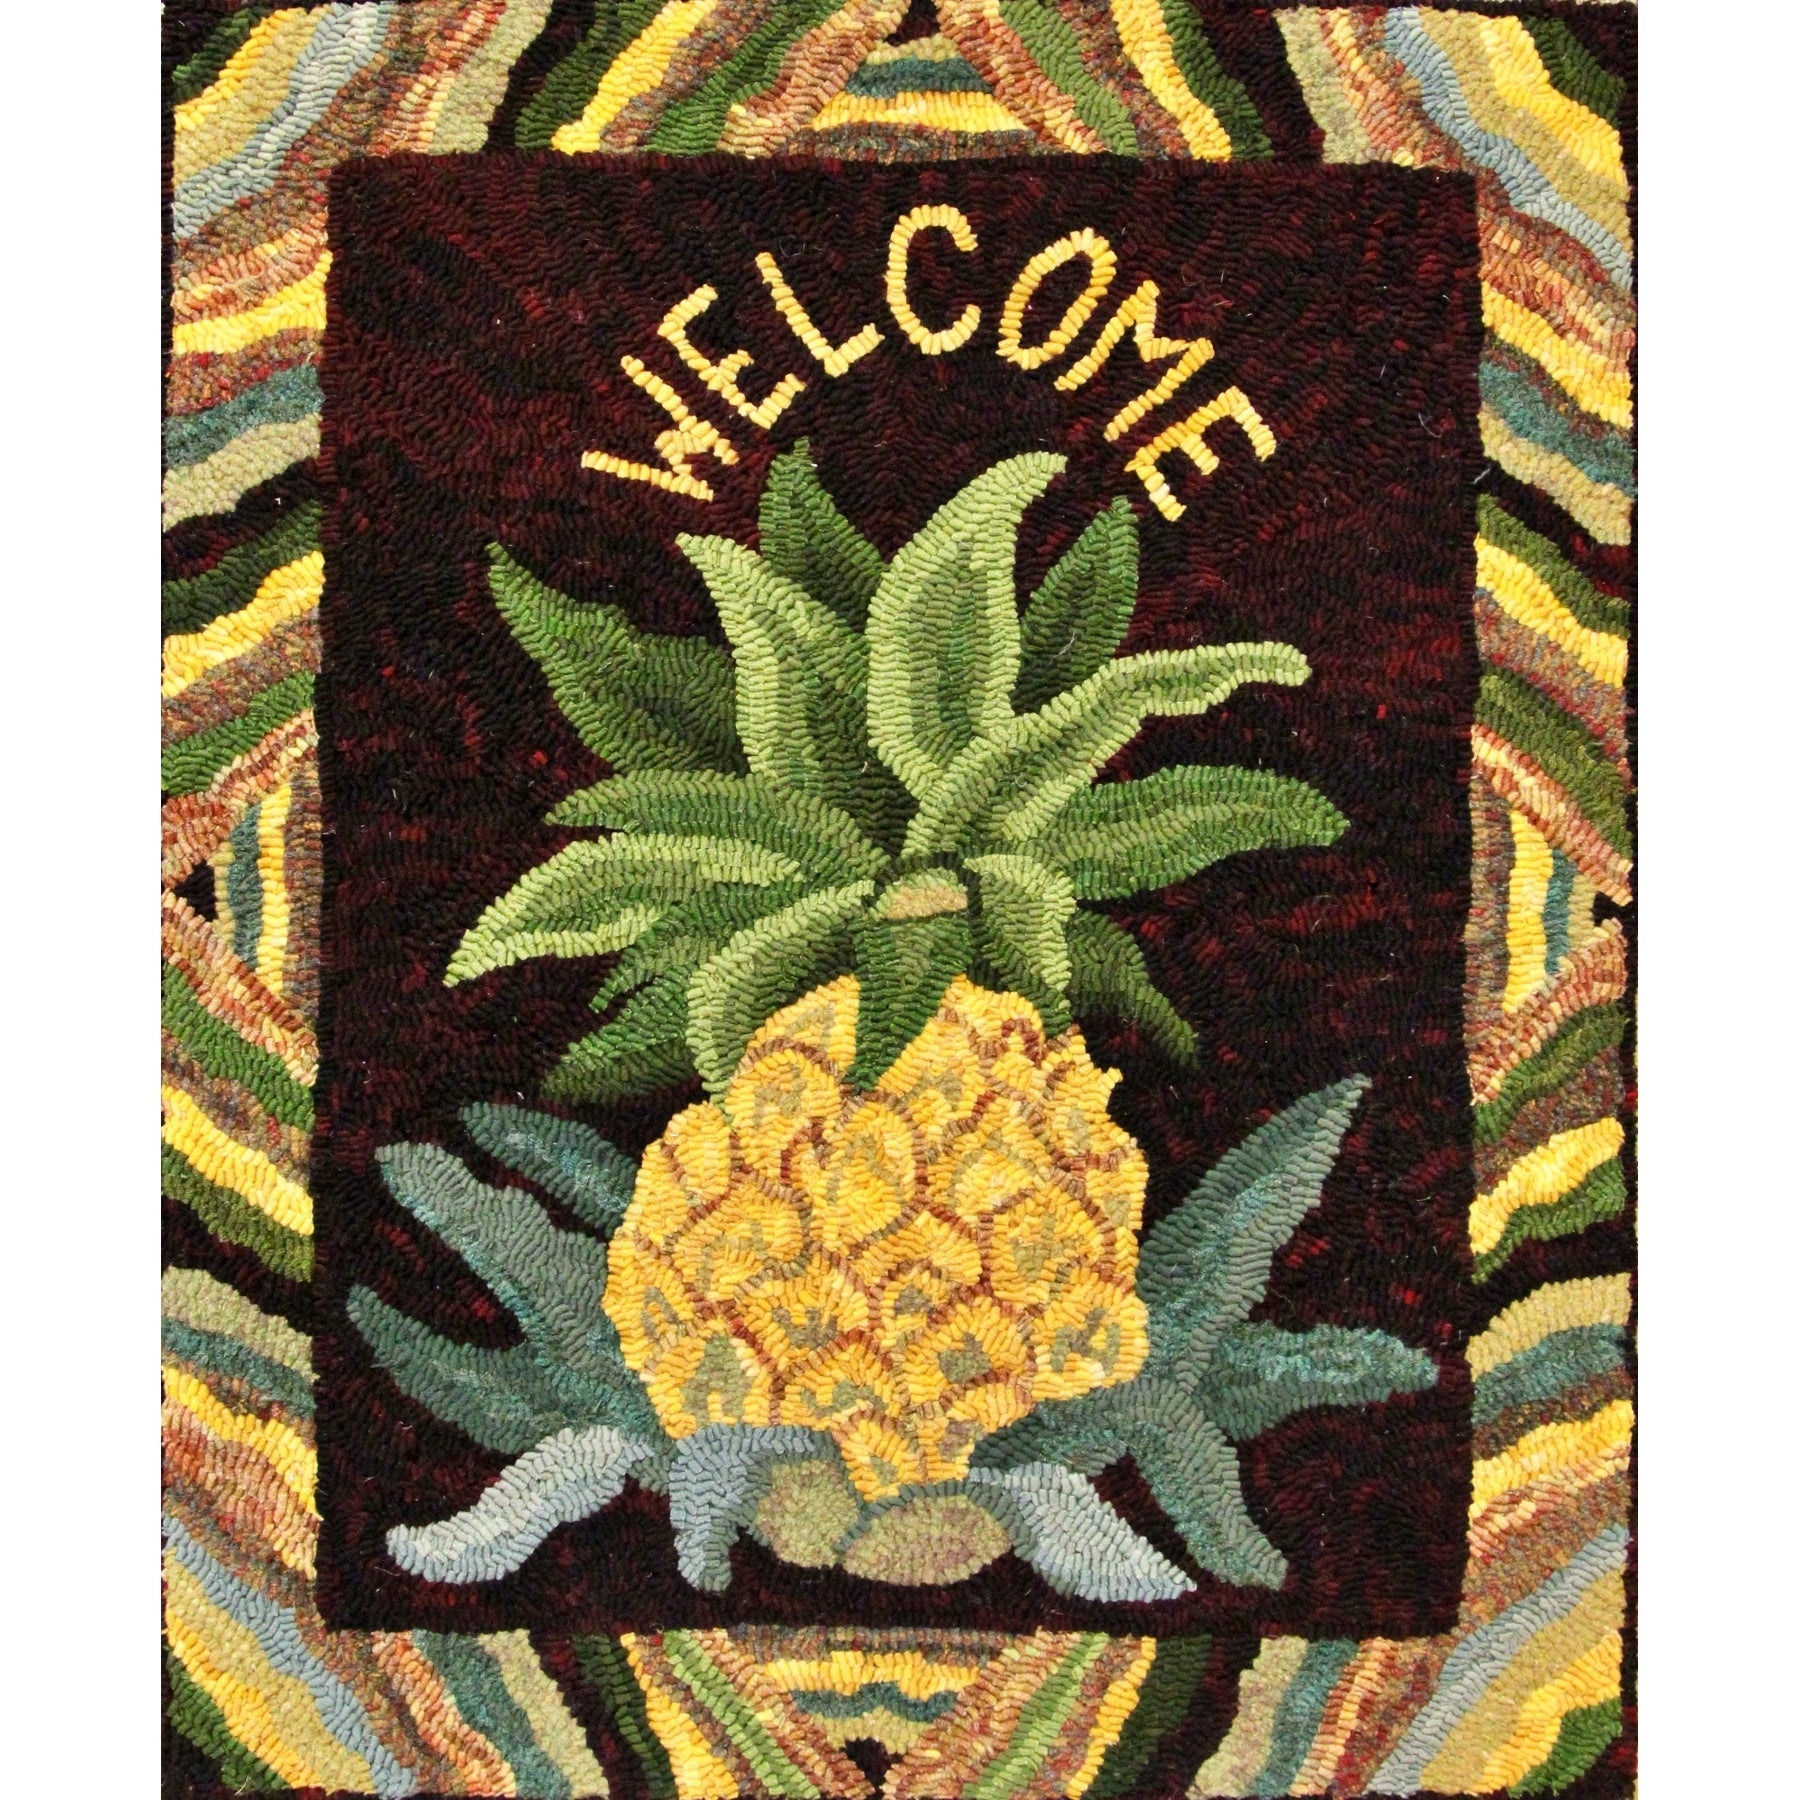 Welcome Pineapple - with Border, rug hooked by Linda Cooney